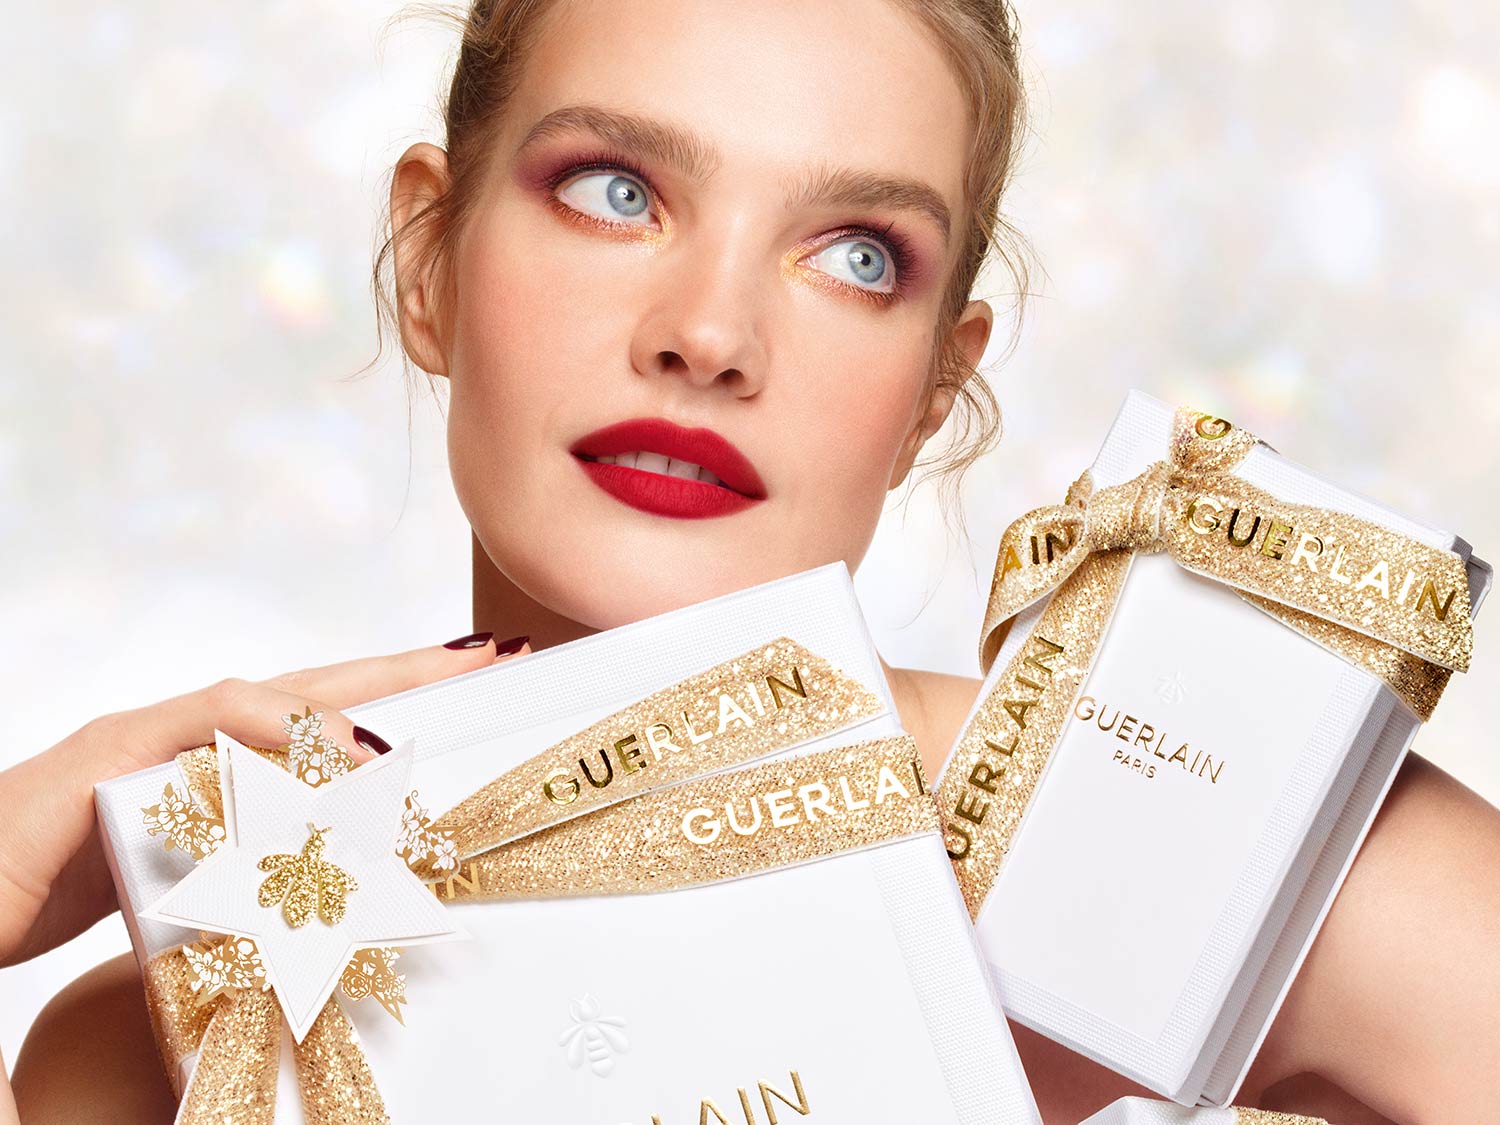 FLY TO THE STARS GUERLAIN HOLIDAY COLLECTION